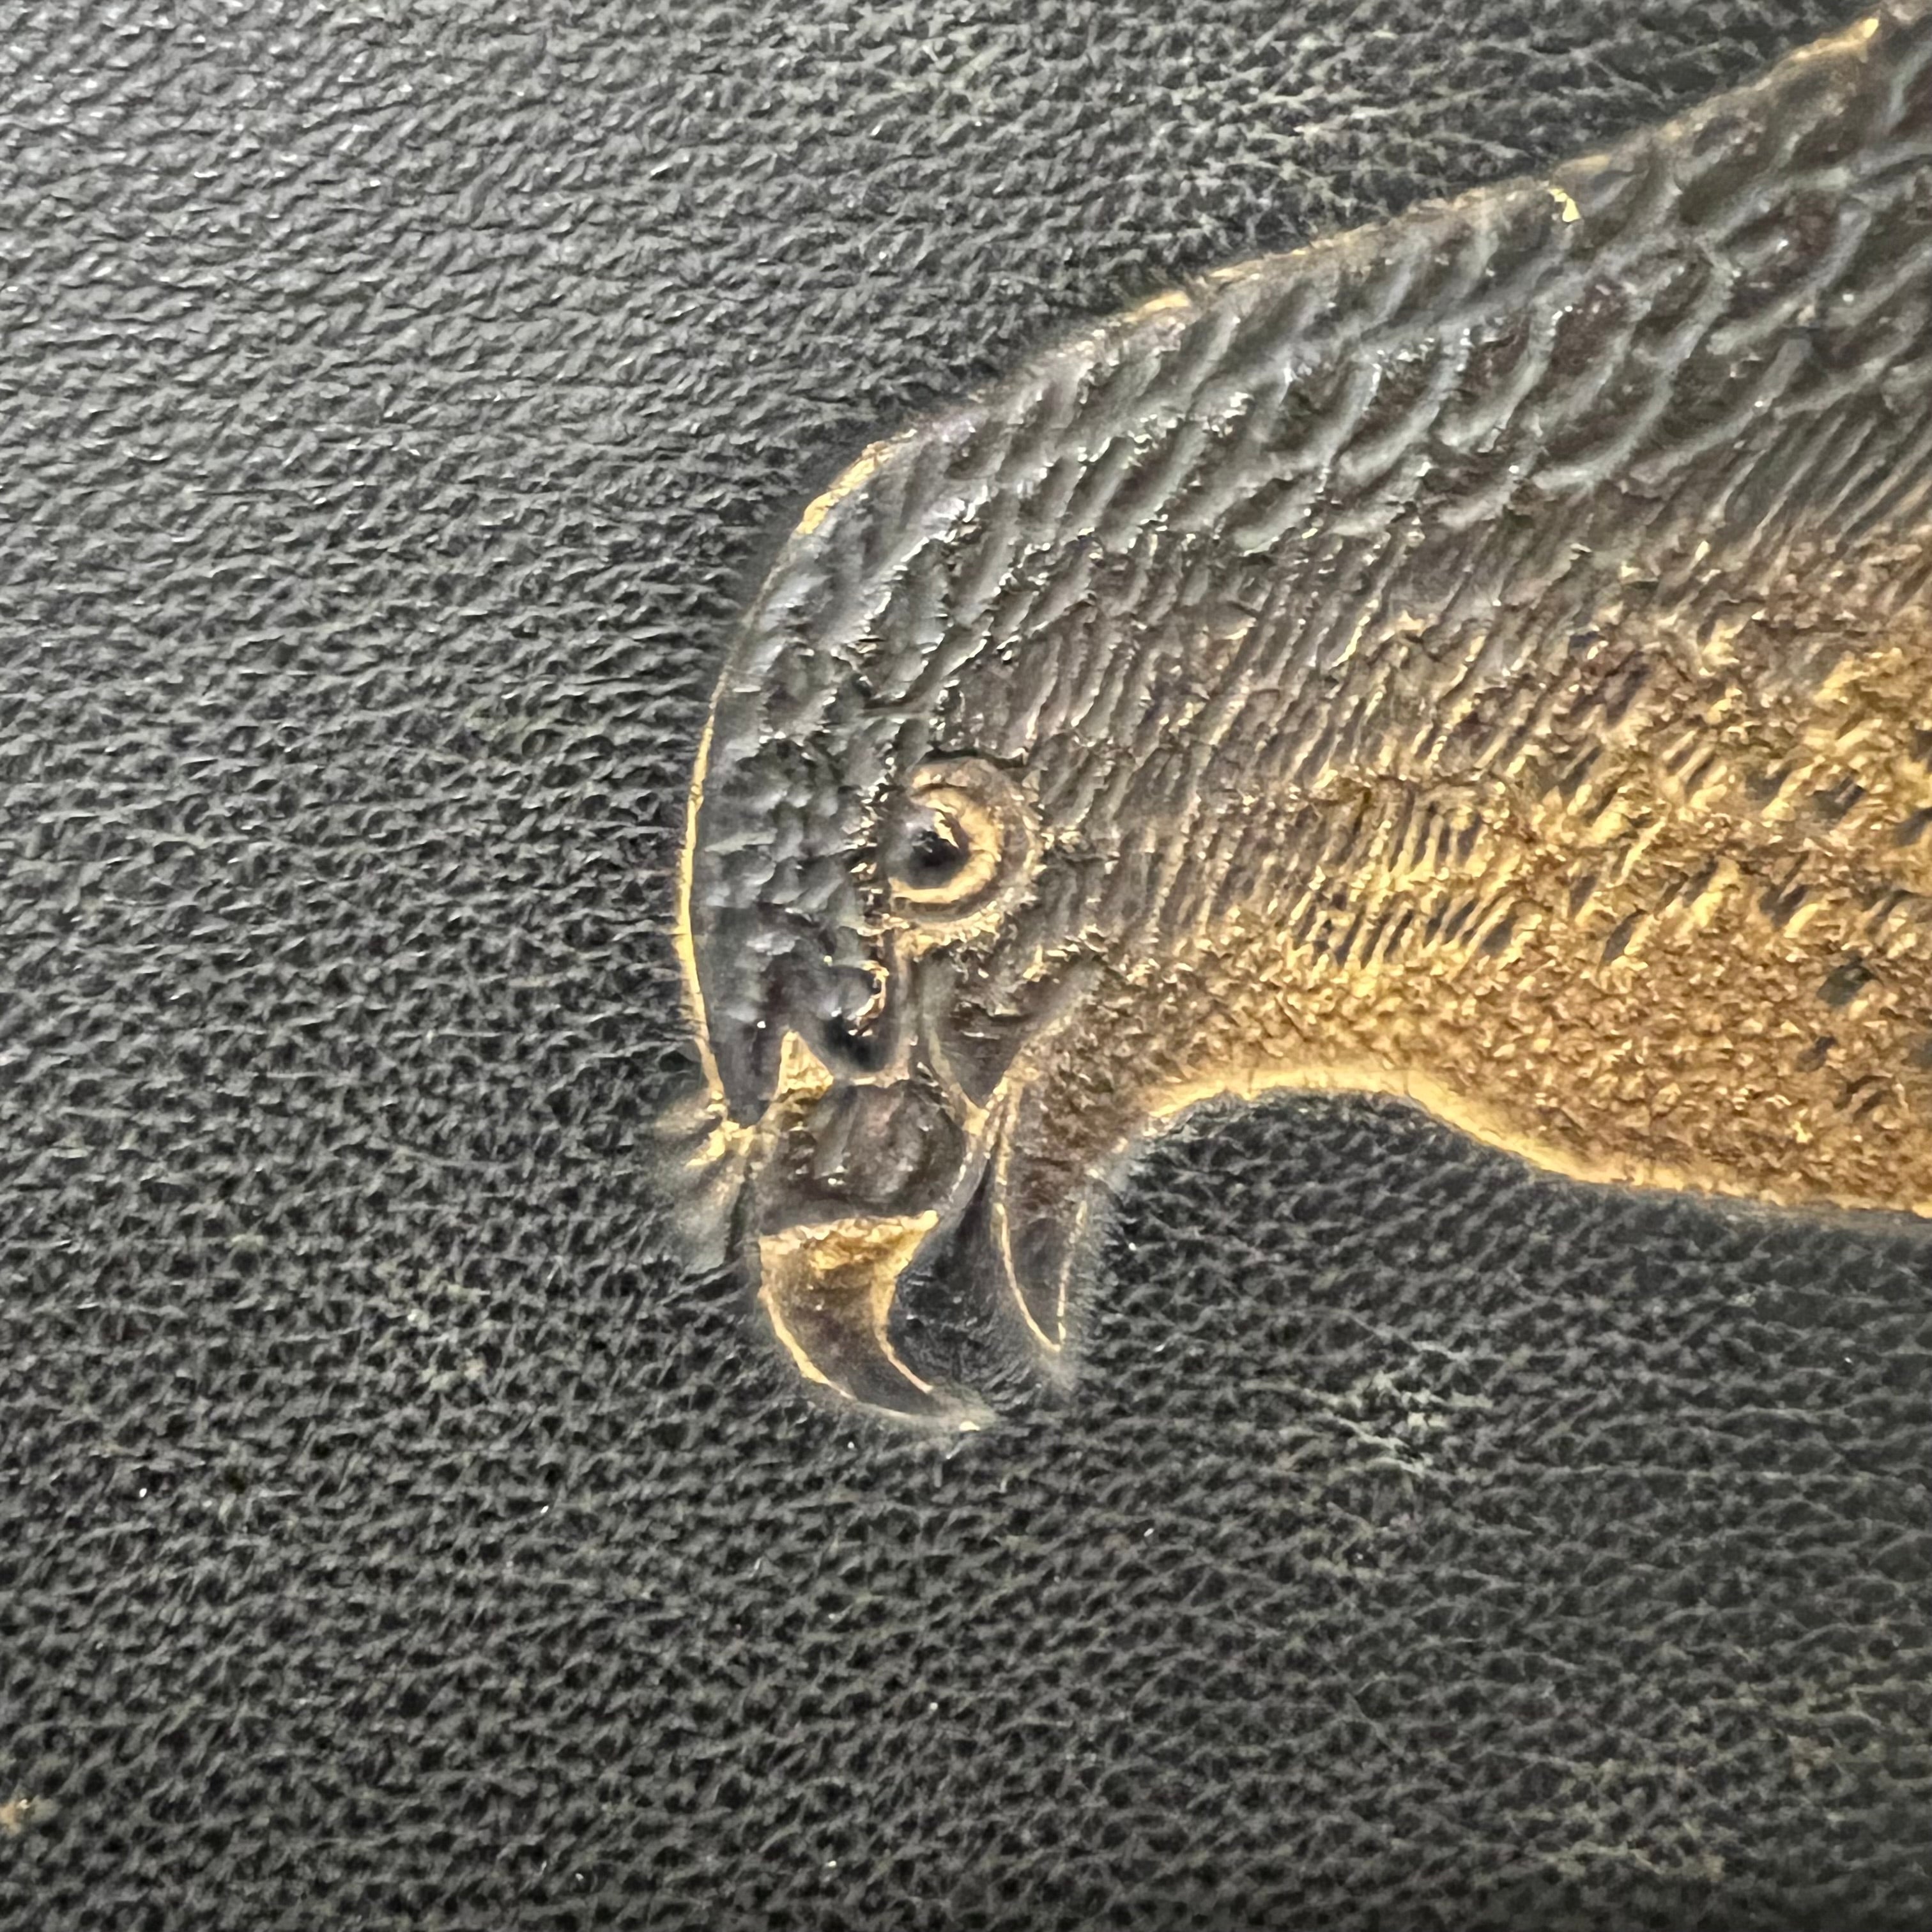 Hawk in Antique Leather Artwork of Hawk and Birds within Landscape - Industrial Decor - Rare Early 1900s Riveted Gold Design - Mystery Artist